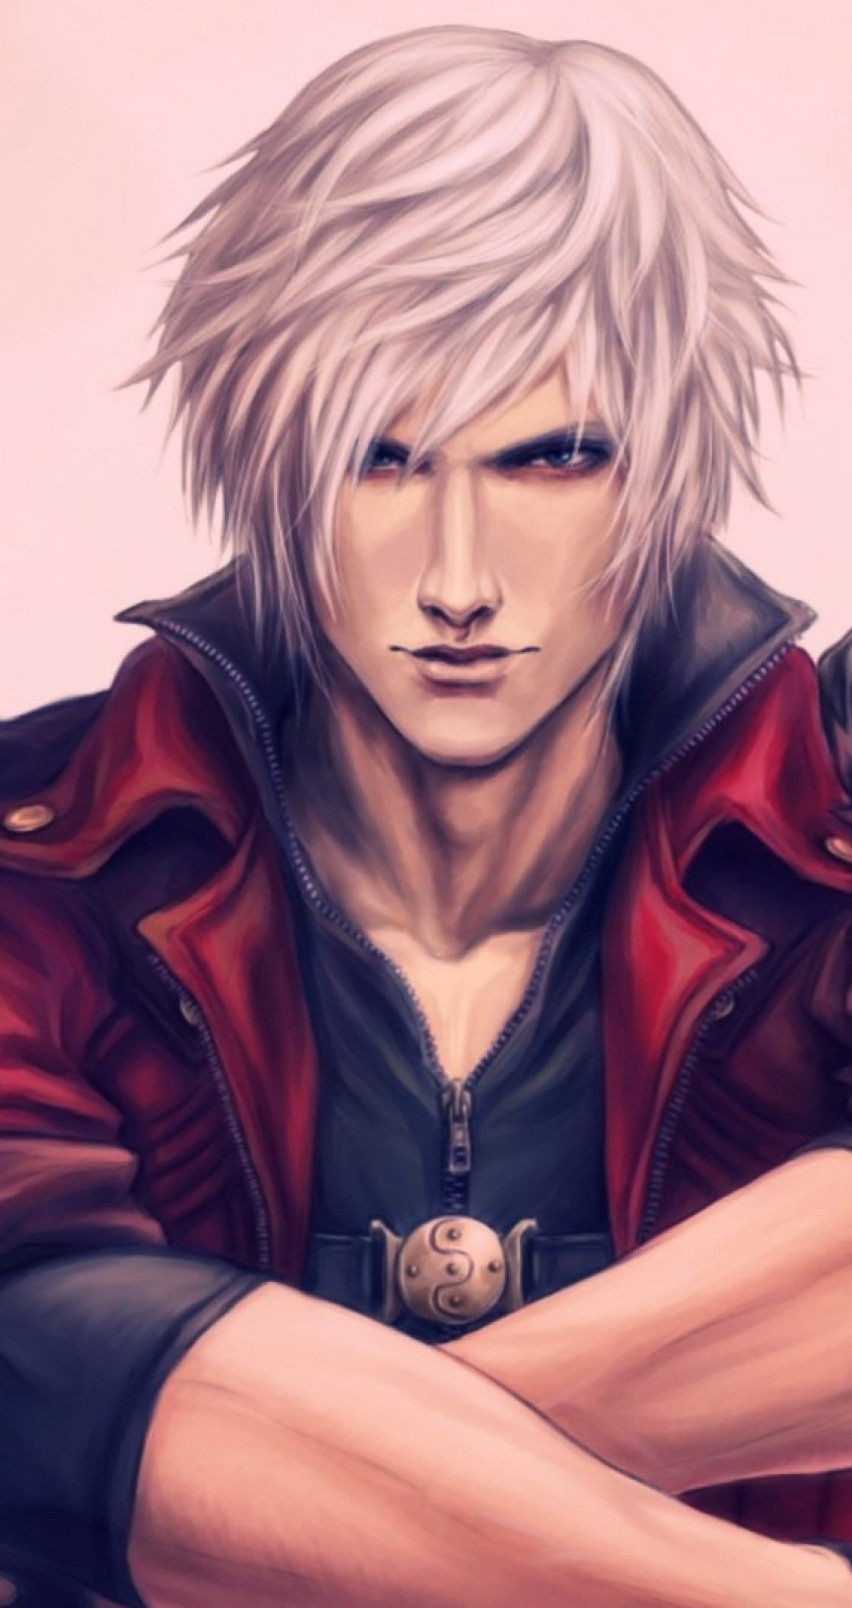 Dante - Devil May Cry Wallpaper for Apple iPhone 6 / 6s